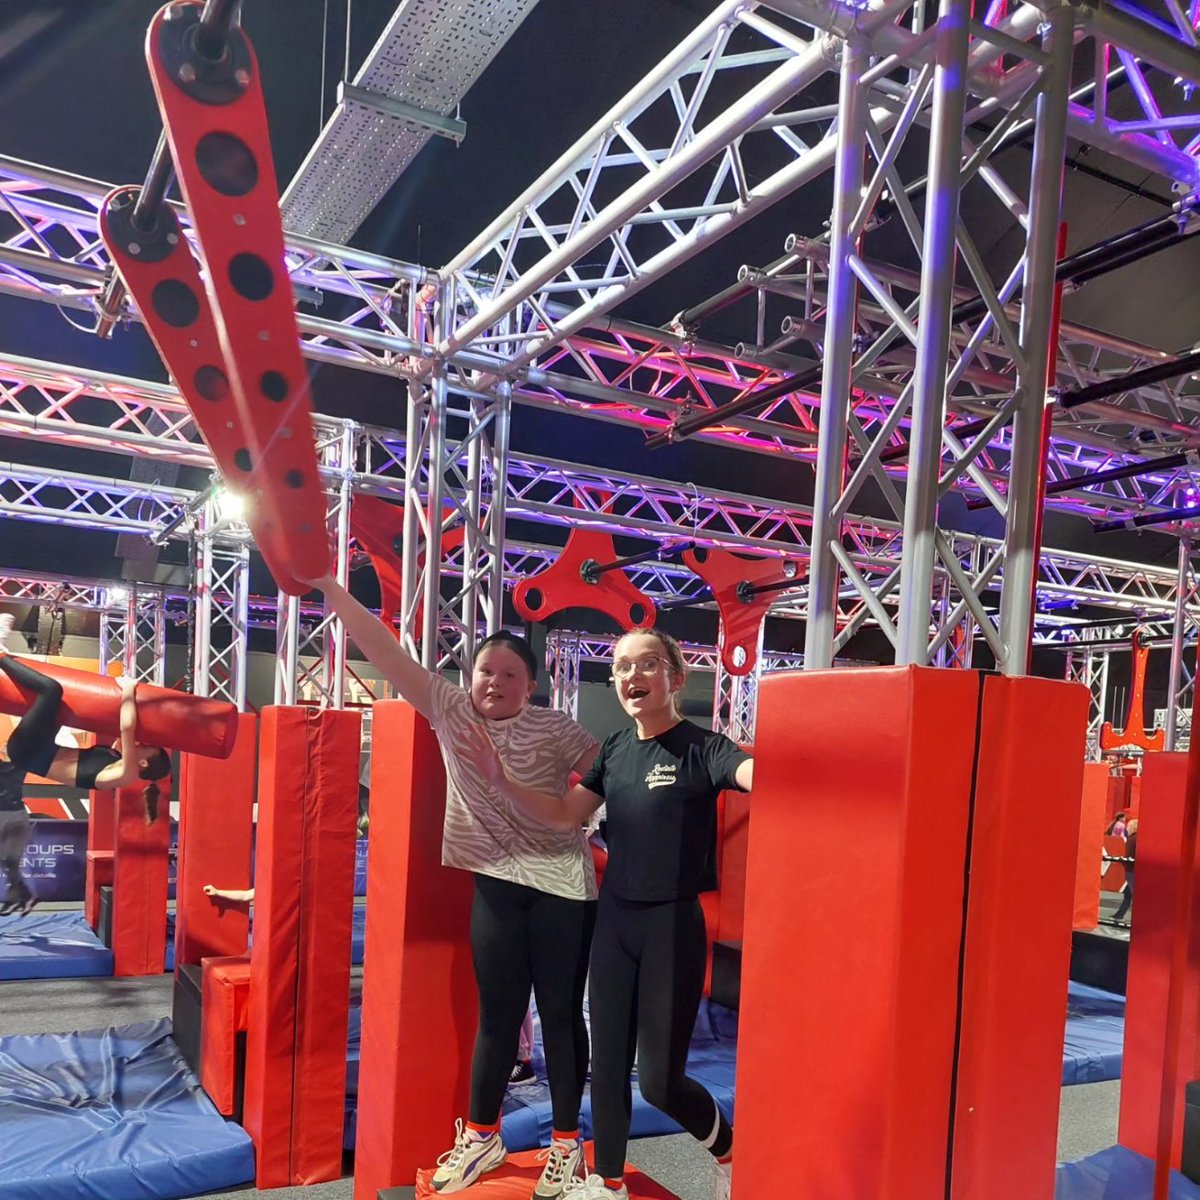 Over 30 young people from the Garforth & Swillington/Kippax & Methley wards took on the @ninjawarrioruk Leeds challenge! 

Well done everyone 👏 

Funded by the local ward Councillors via the @_YourCommunity Outer East Community Committee Youth Activity Fund. 

#youthworkleeds